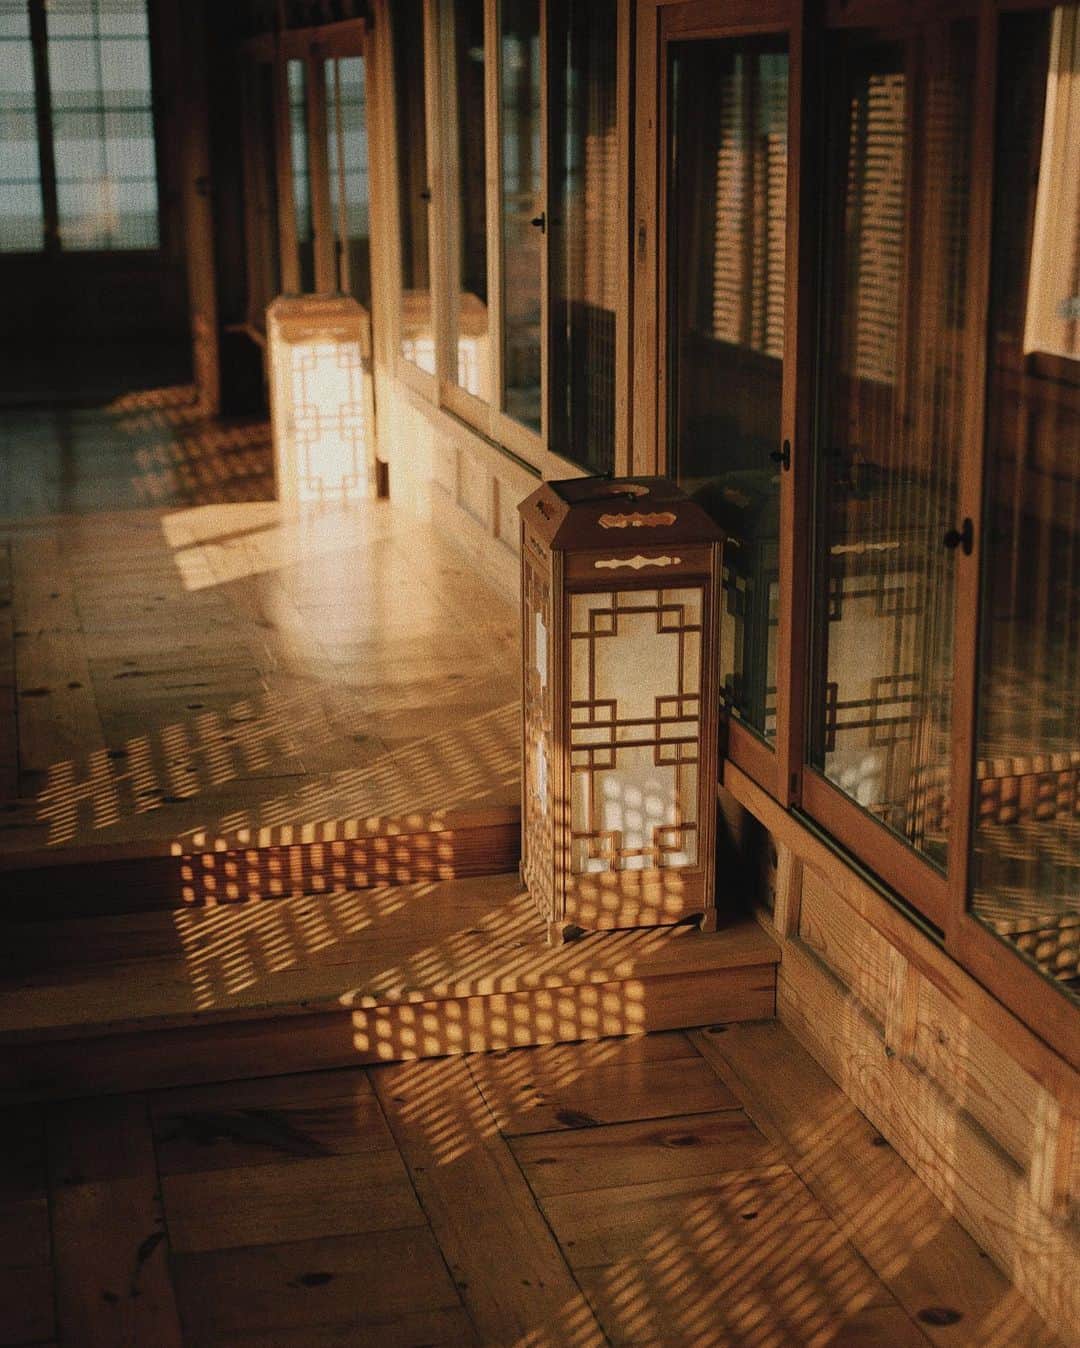 C E R E A Lのインスタグラム：「The painstaking building work, employing traditional methods for working with wood, stone, paper, and tile, was completed in 2007.   Automatic doors and electric lanterns are carefully concealed by latticed woodwork and hanji paper. Stone sculptures of haechi — protective spirits — flank the steps to the entrance, their eroded forms like abstract, stocky lions.   From Cereal Volume 19. Read the full story via the link in profile.   📷: @rvstapleton 🖊: @olliehorne_」